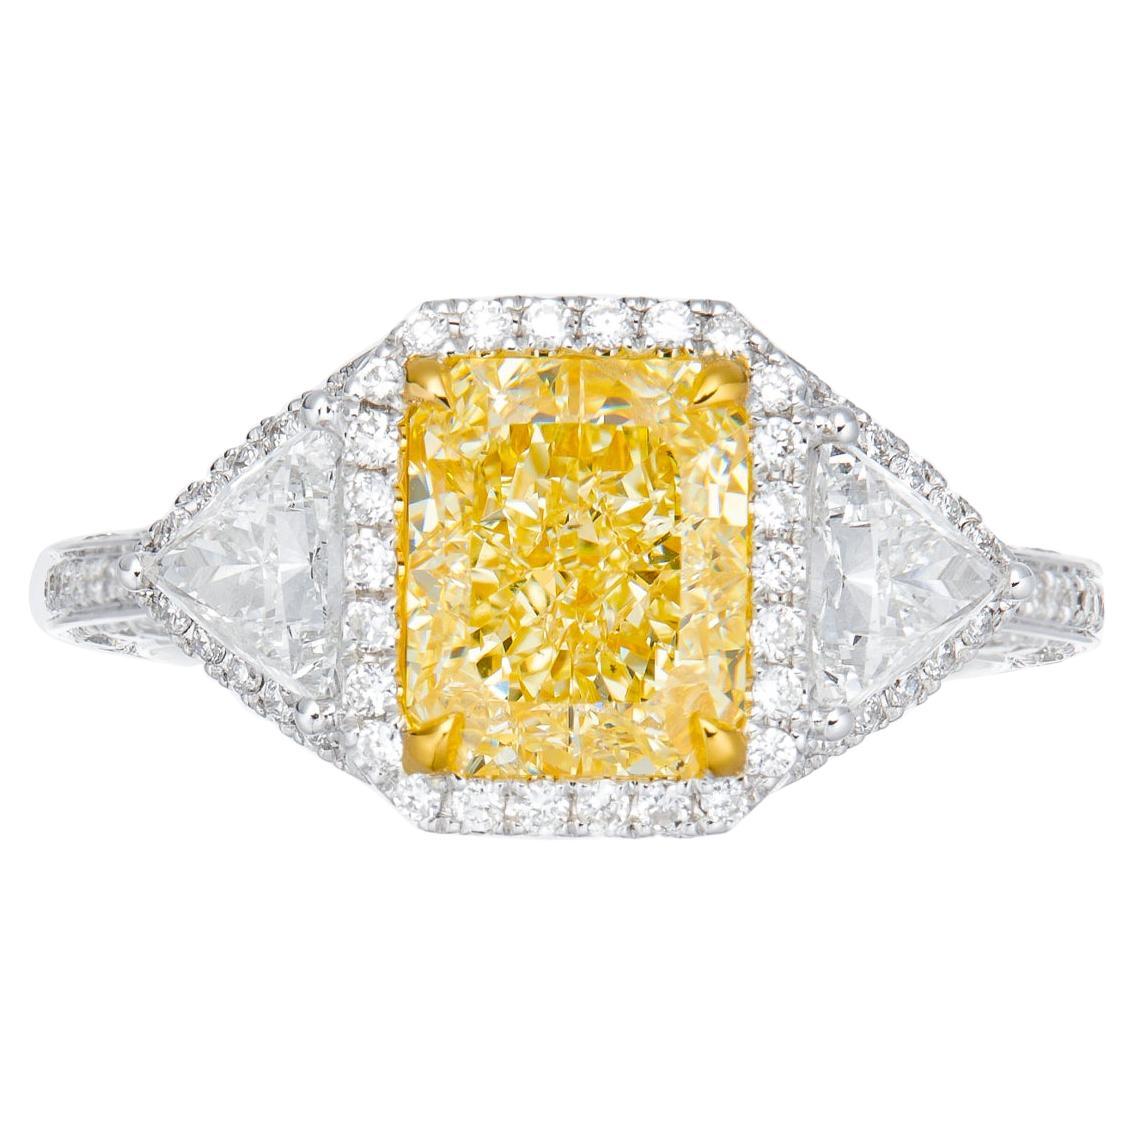 GIA Certified, 2.21ct Natural Radiant Cut Fancy Light Yellow Diamond Solitaire